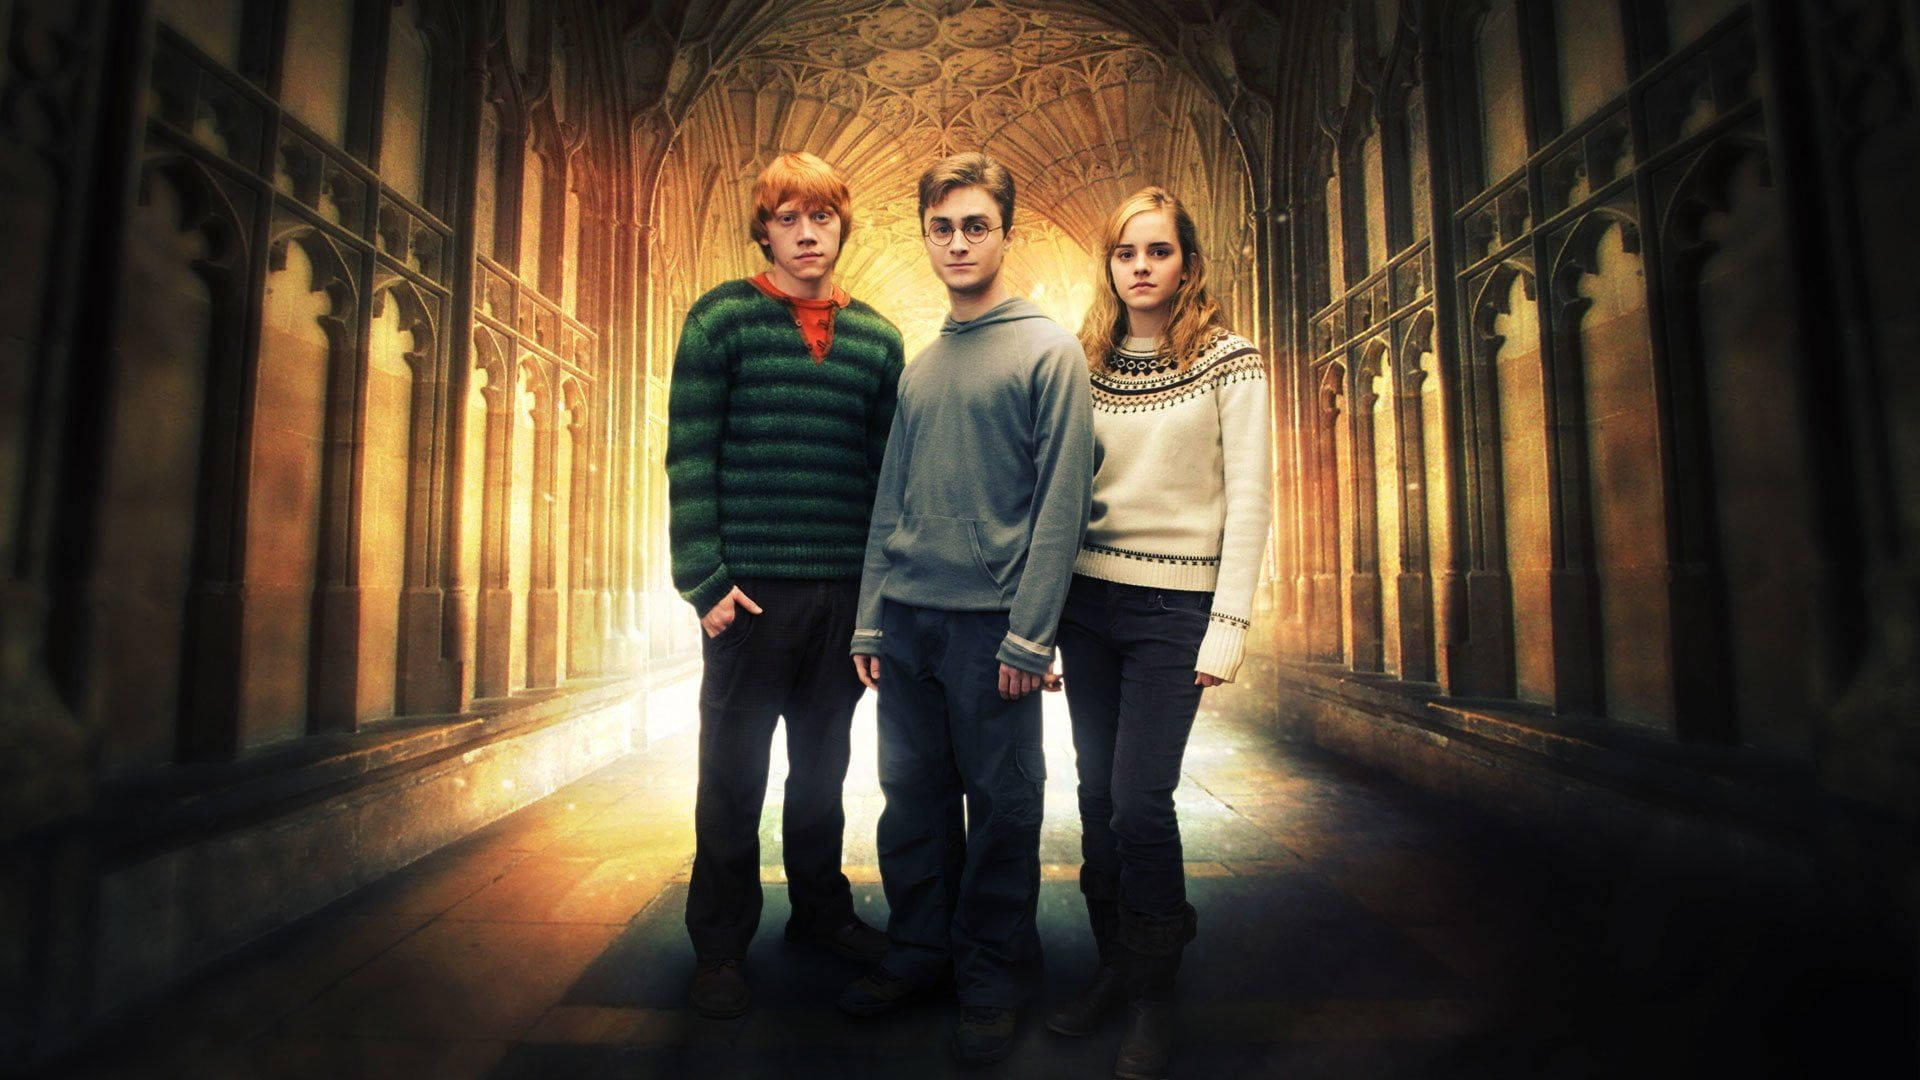 Ron Weasley With Harry Potter And Hermione Granger